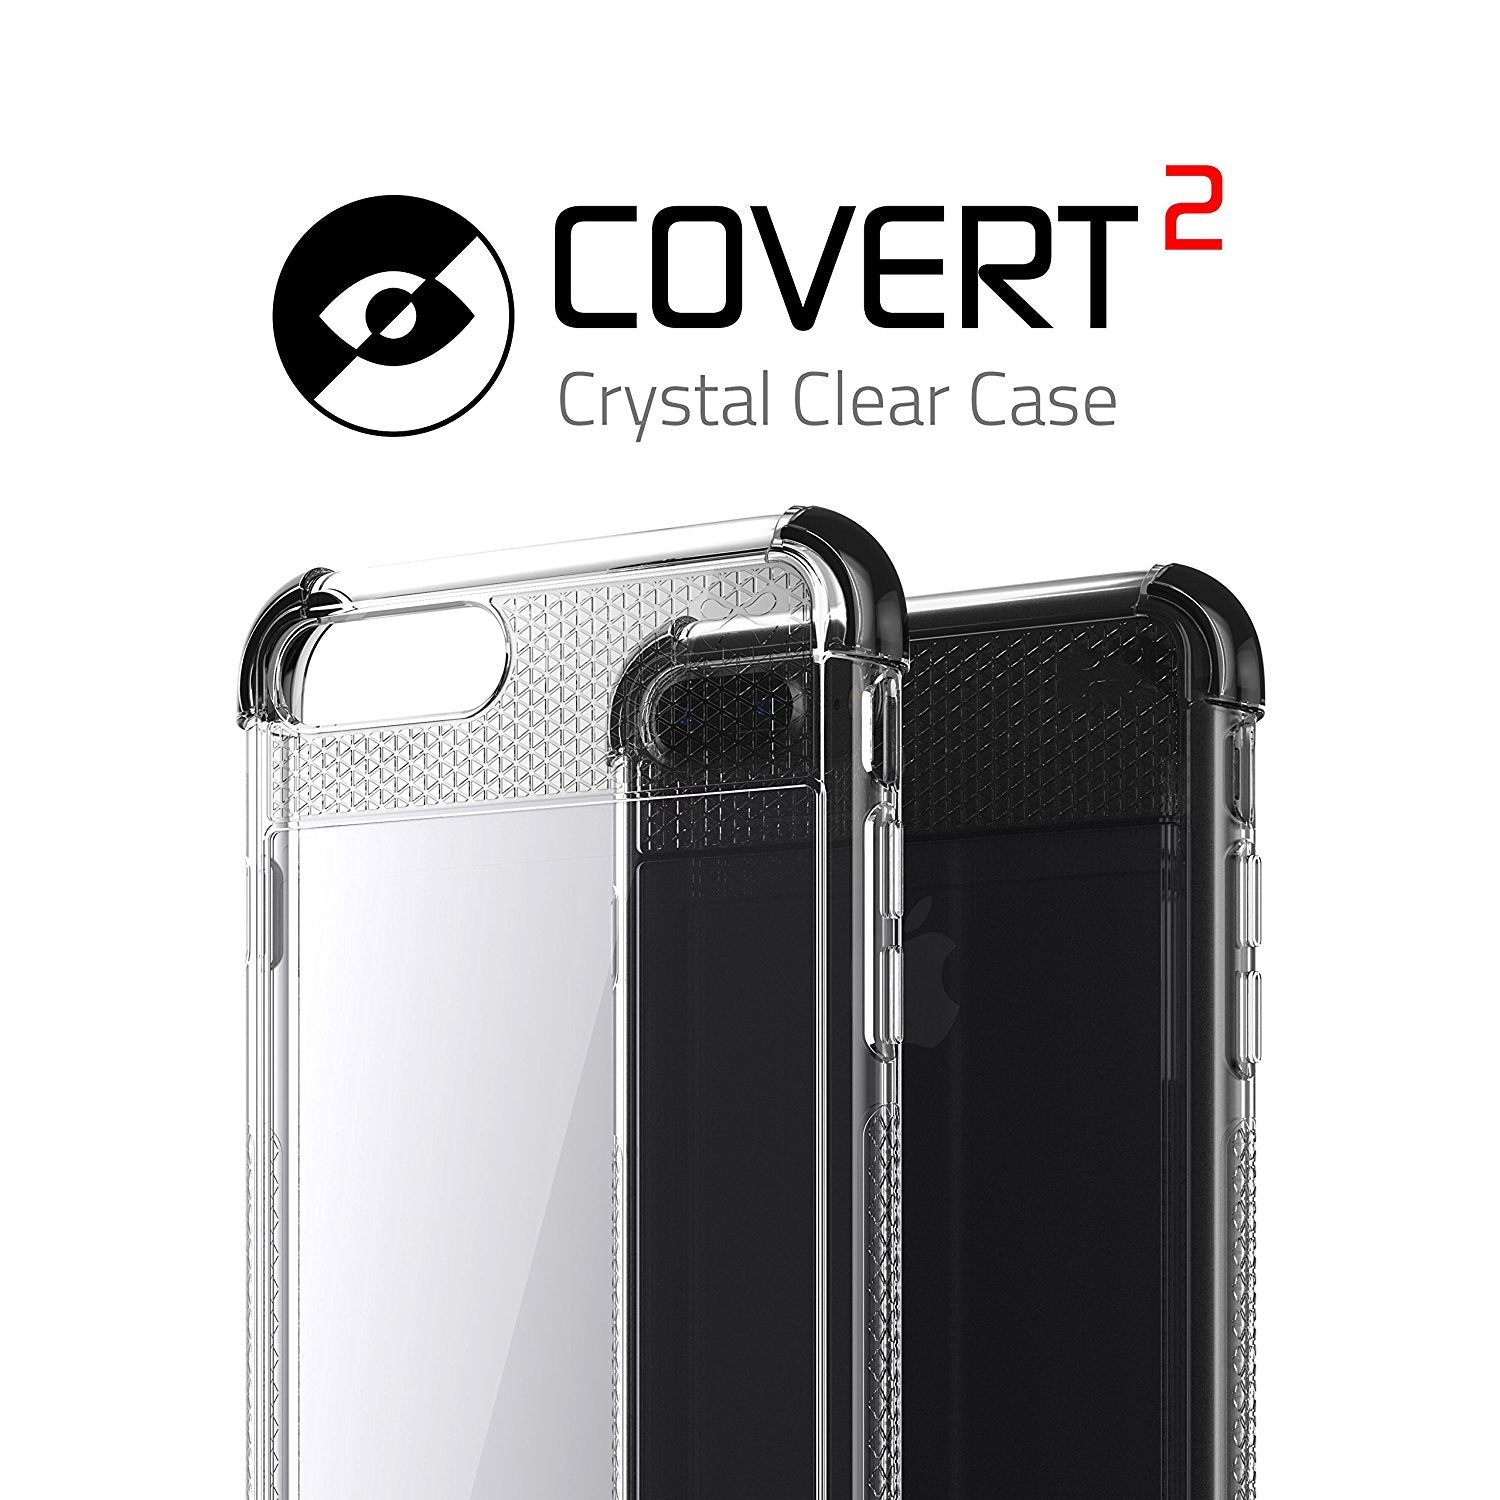 iPhone 8+ Plus Case, Ghostek Covert 2 Series for iPhone 8+ Plus Protective Case [ Black]